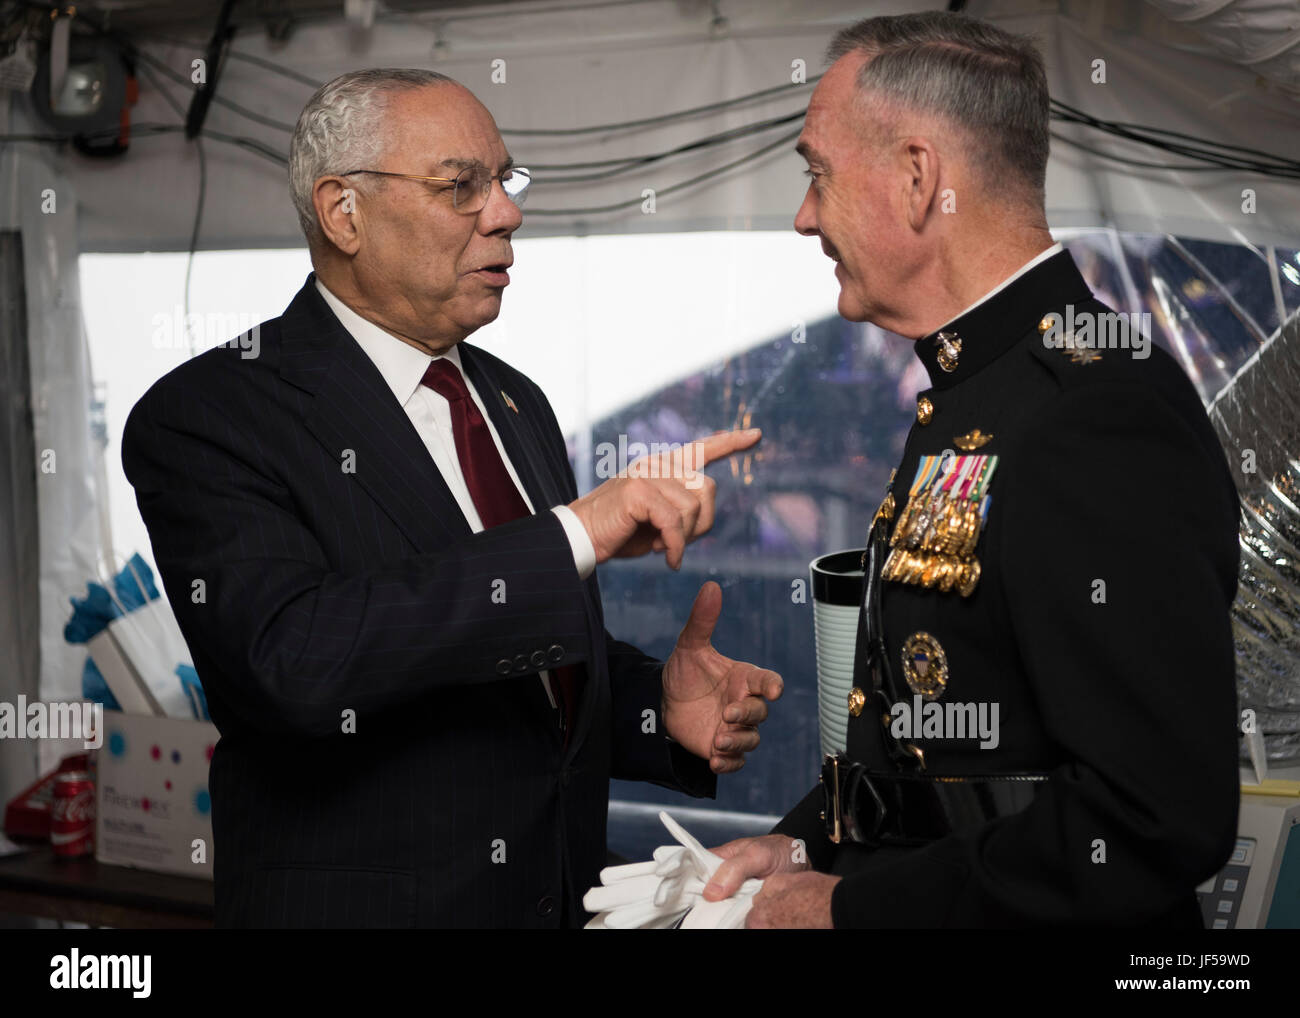 Army Gen.Colin L. Powell, (Ret.) speaks with Marine Corps Gen. Joseph F. Dunford Jr., chairman of the Joint Chiefs of Staff, before the National Memorial Day Concert at the west lawn of the U.S. Capitol, Washington, D.C., May 28, 2017. The concert’s mission is to unite the country in remembrance and appreciation of the fallen and to serve those who are grieving. (Dept. of Defense photo by Navy Petty Officer 2nd Class Dominique A. Pineiro/Released) Stock Photo